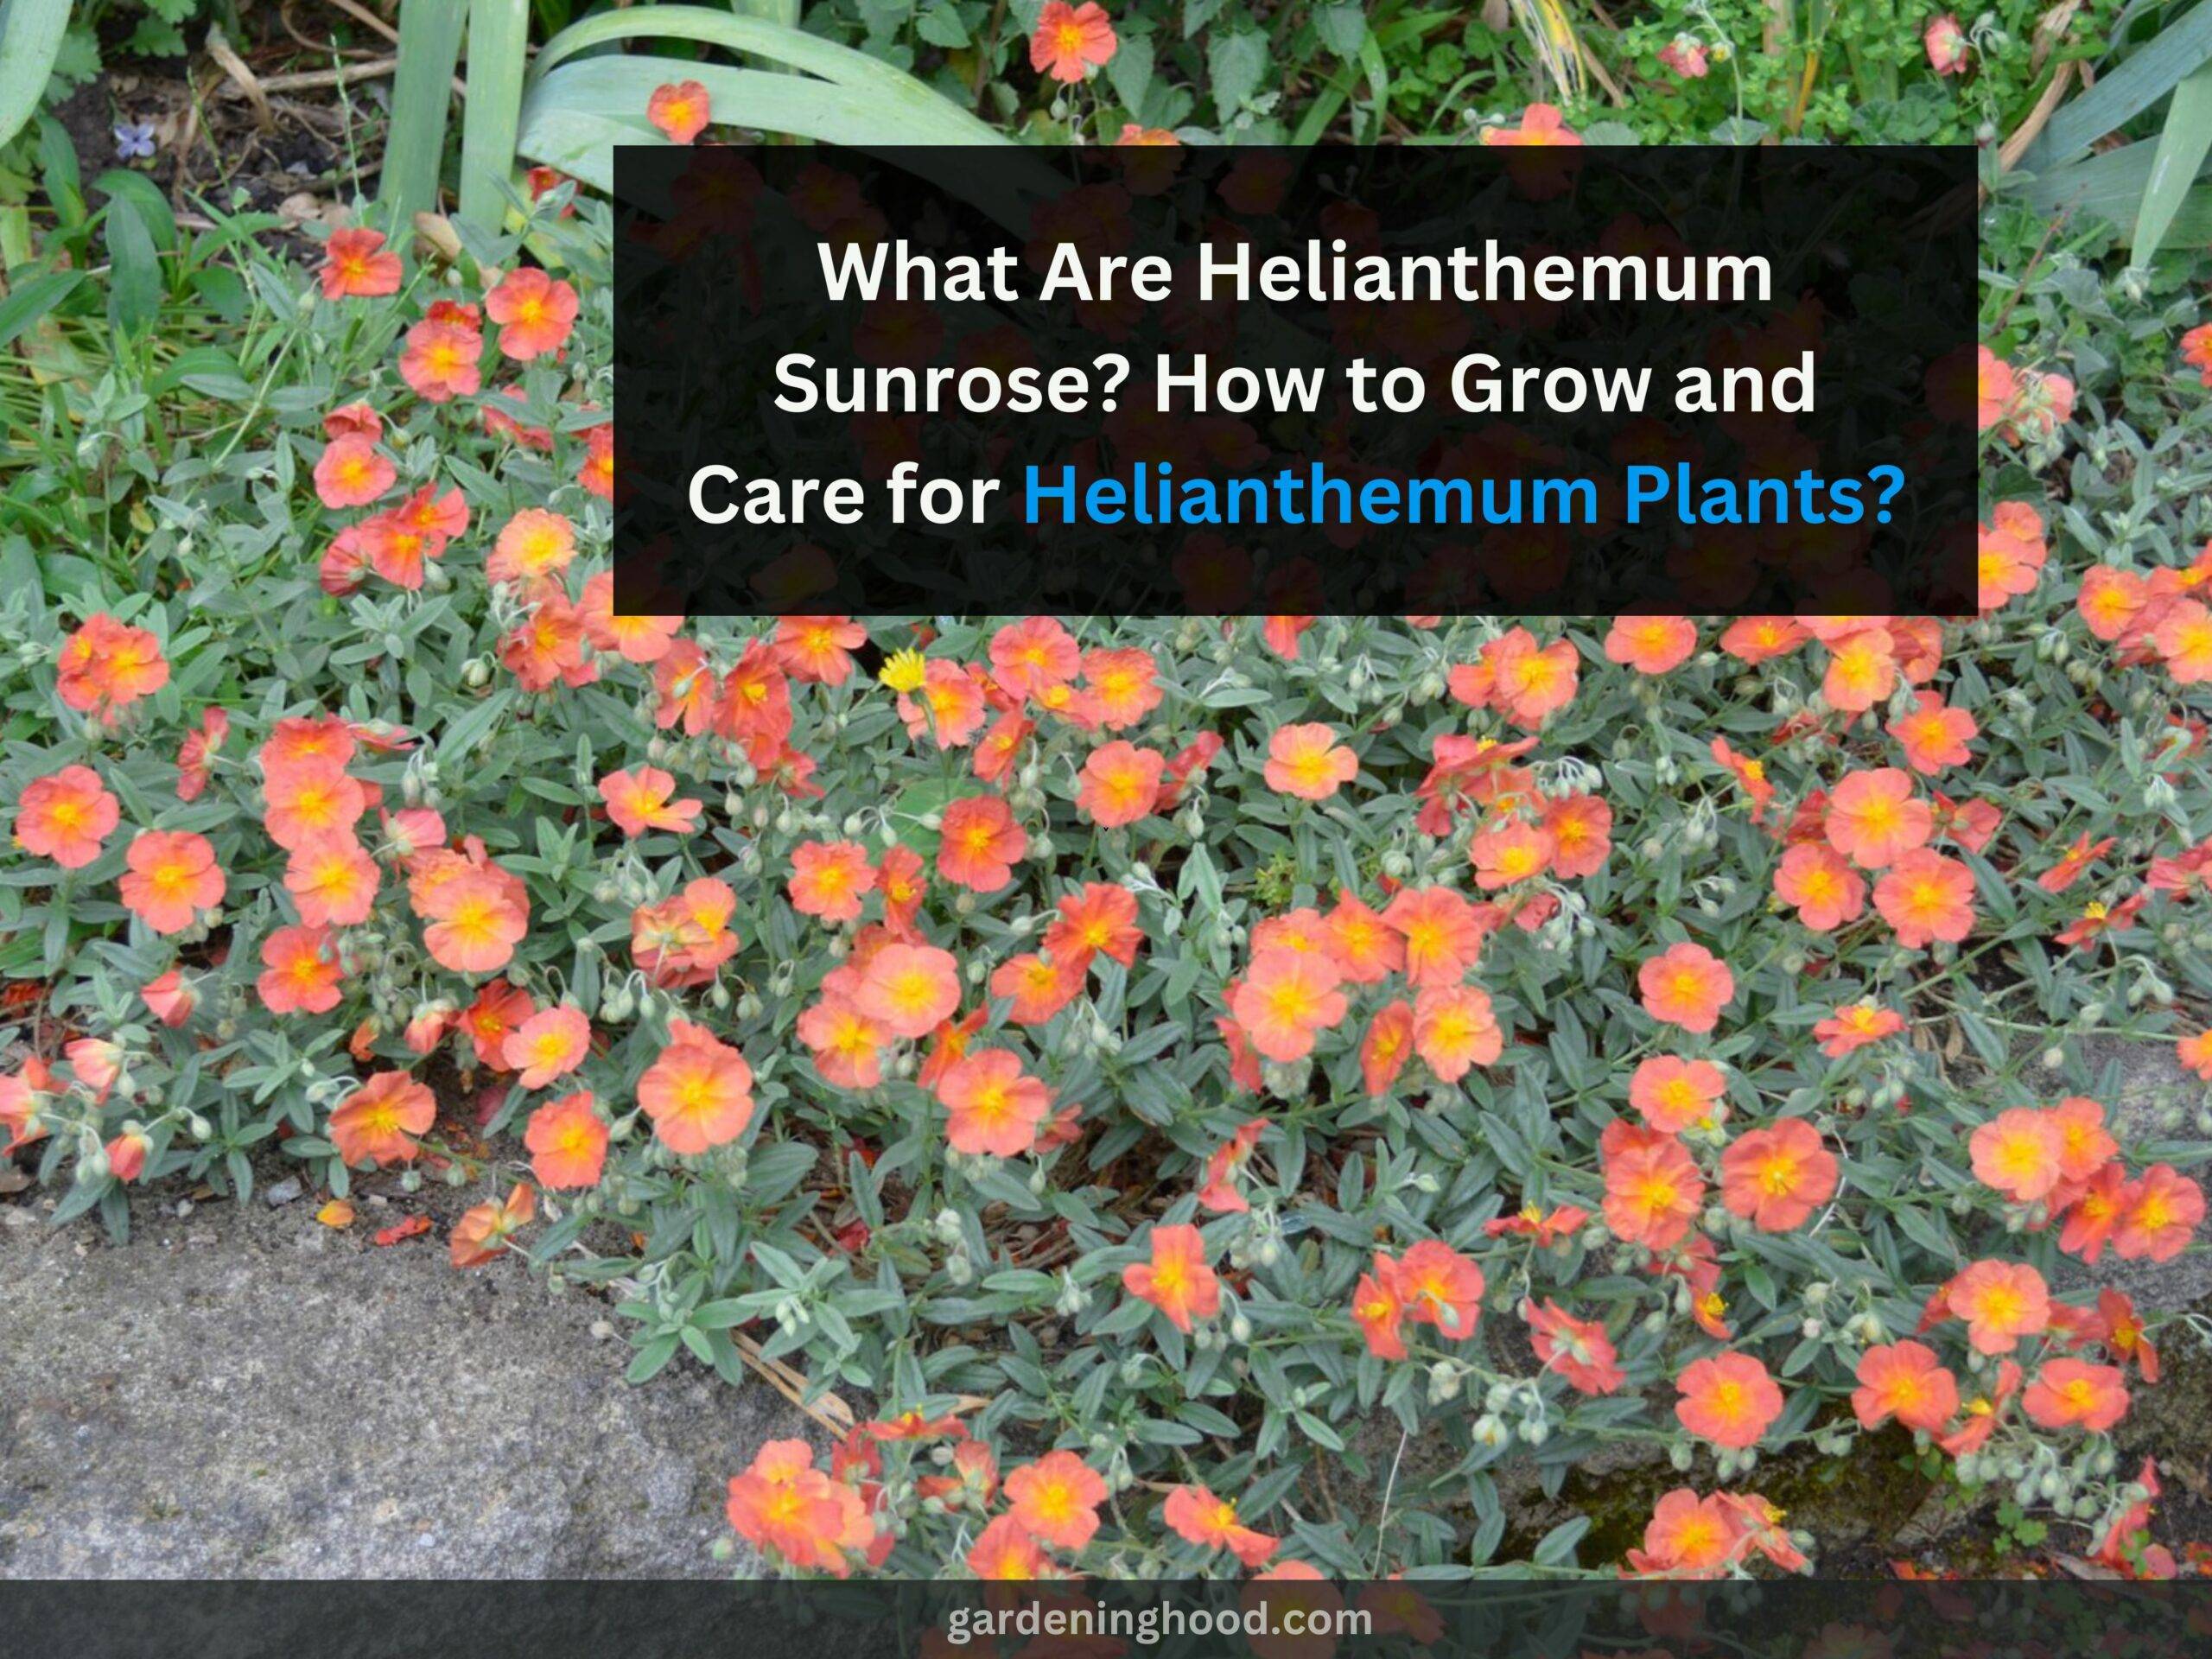 What Are Helianthemum Sunrose? How to Grow and Care for Helianthemum Plants?